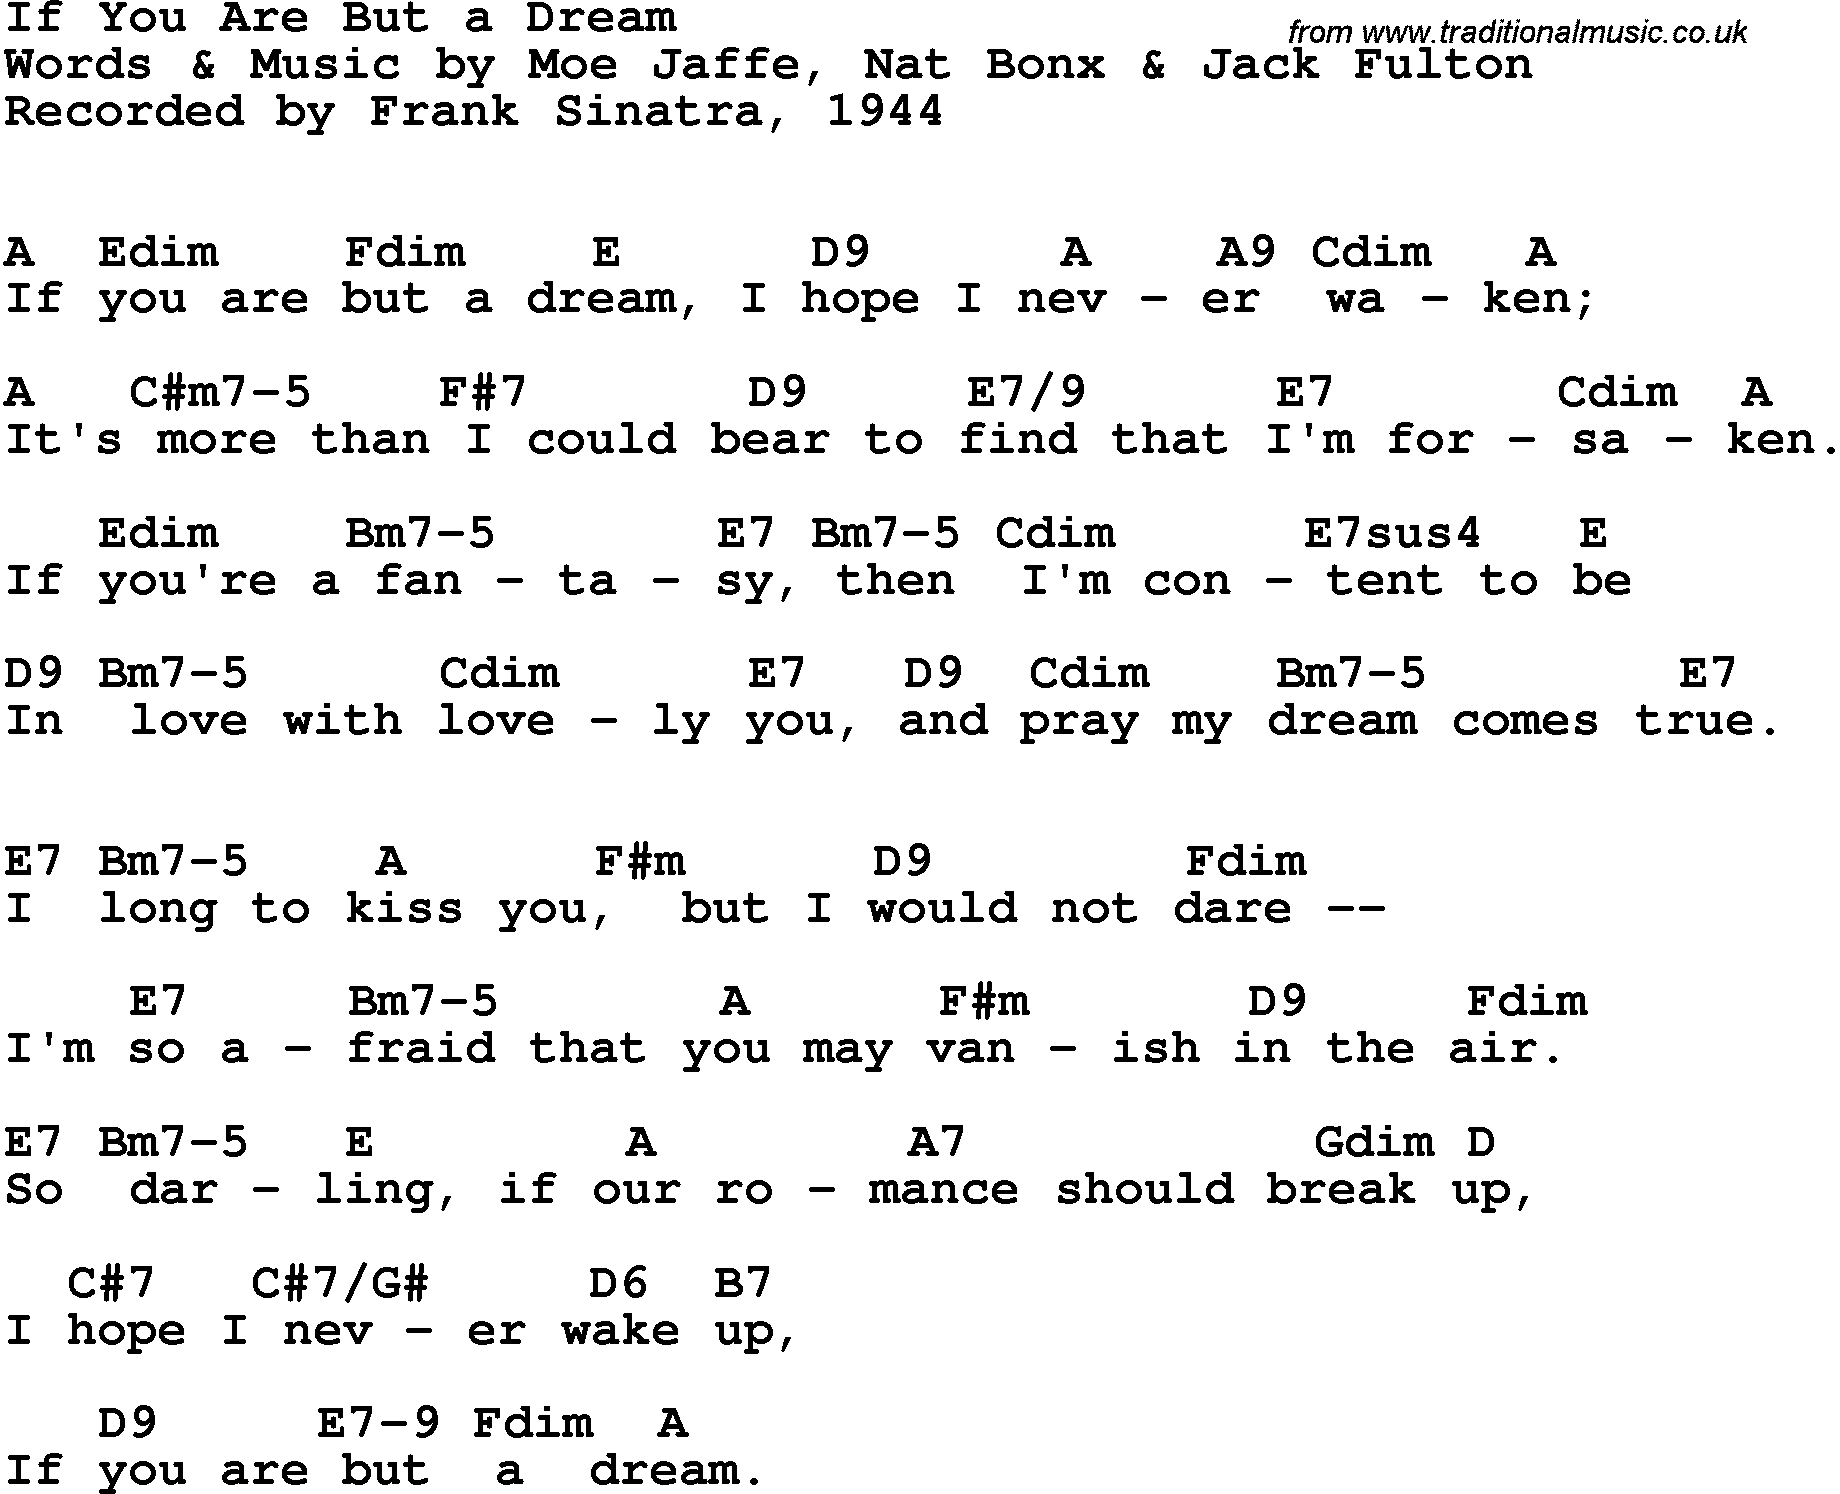 Song Lyrics with guitar chords for If You Are But A Dream - Frank Sinatra, 1944